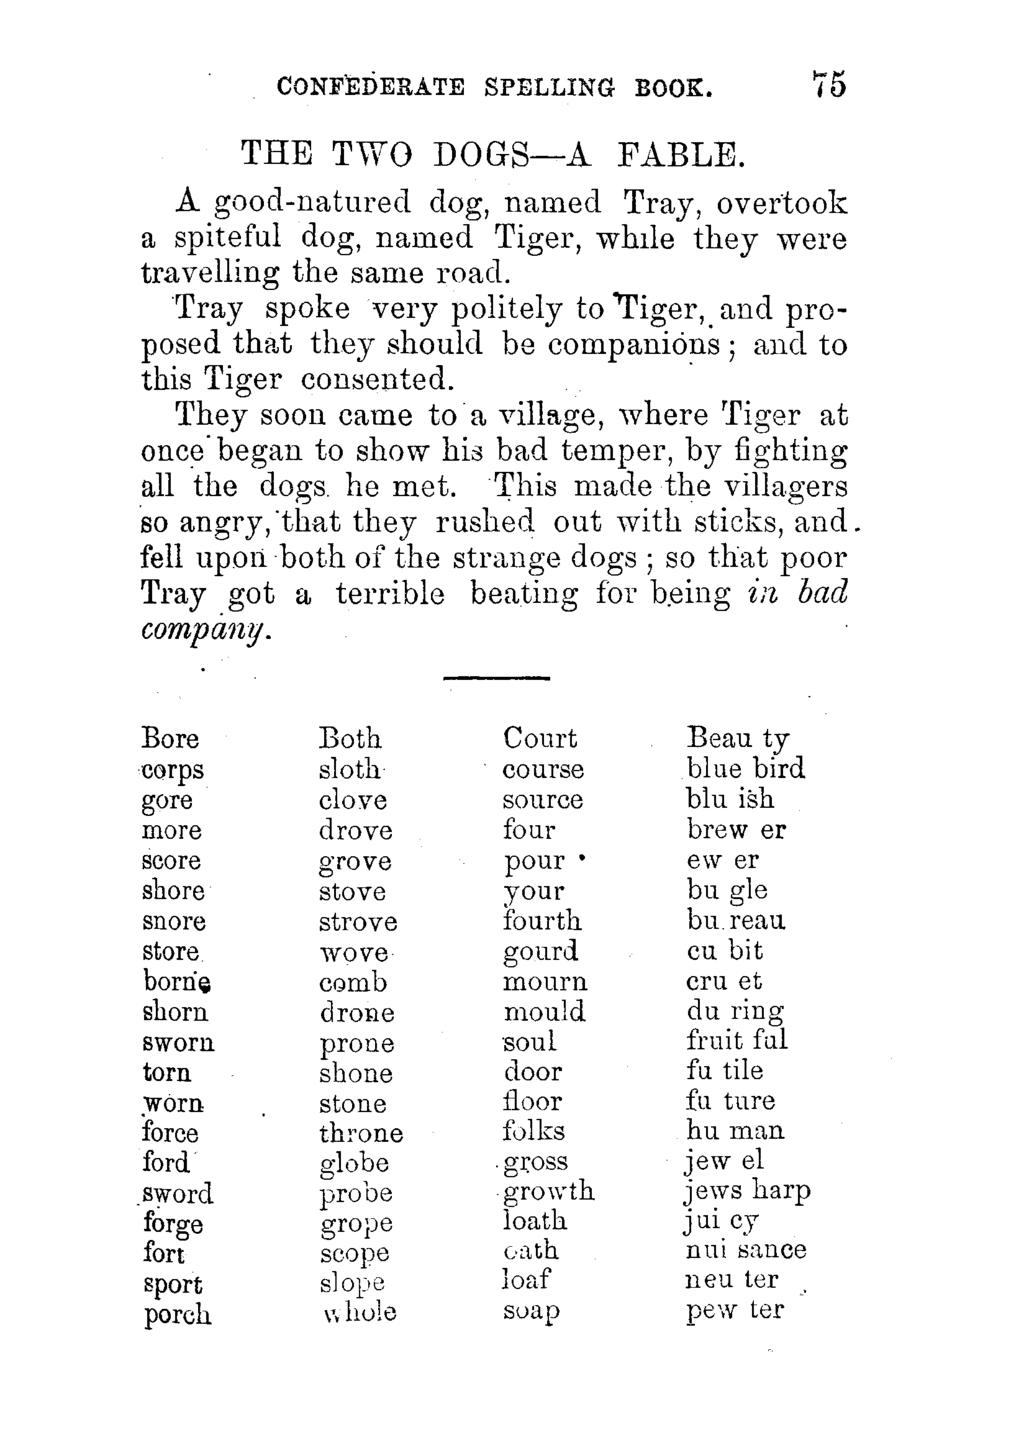 CONFEDERATE SPELLING BOOK. 75 THE TWO DOGS A FABLE. A good-natured dog, named Tray, overtook a spiteful dog, named Tiger, while they were travelling the same road.